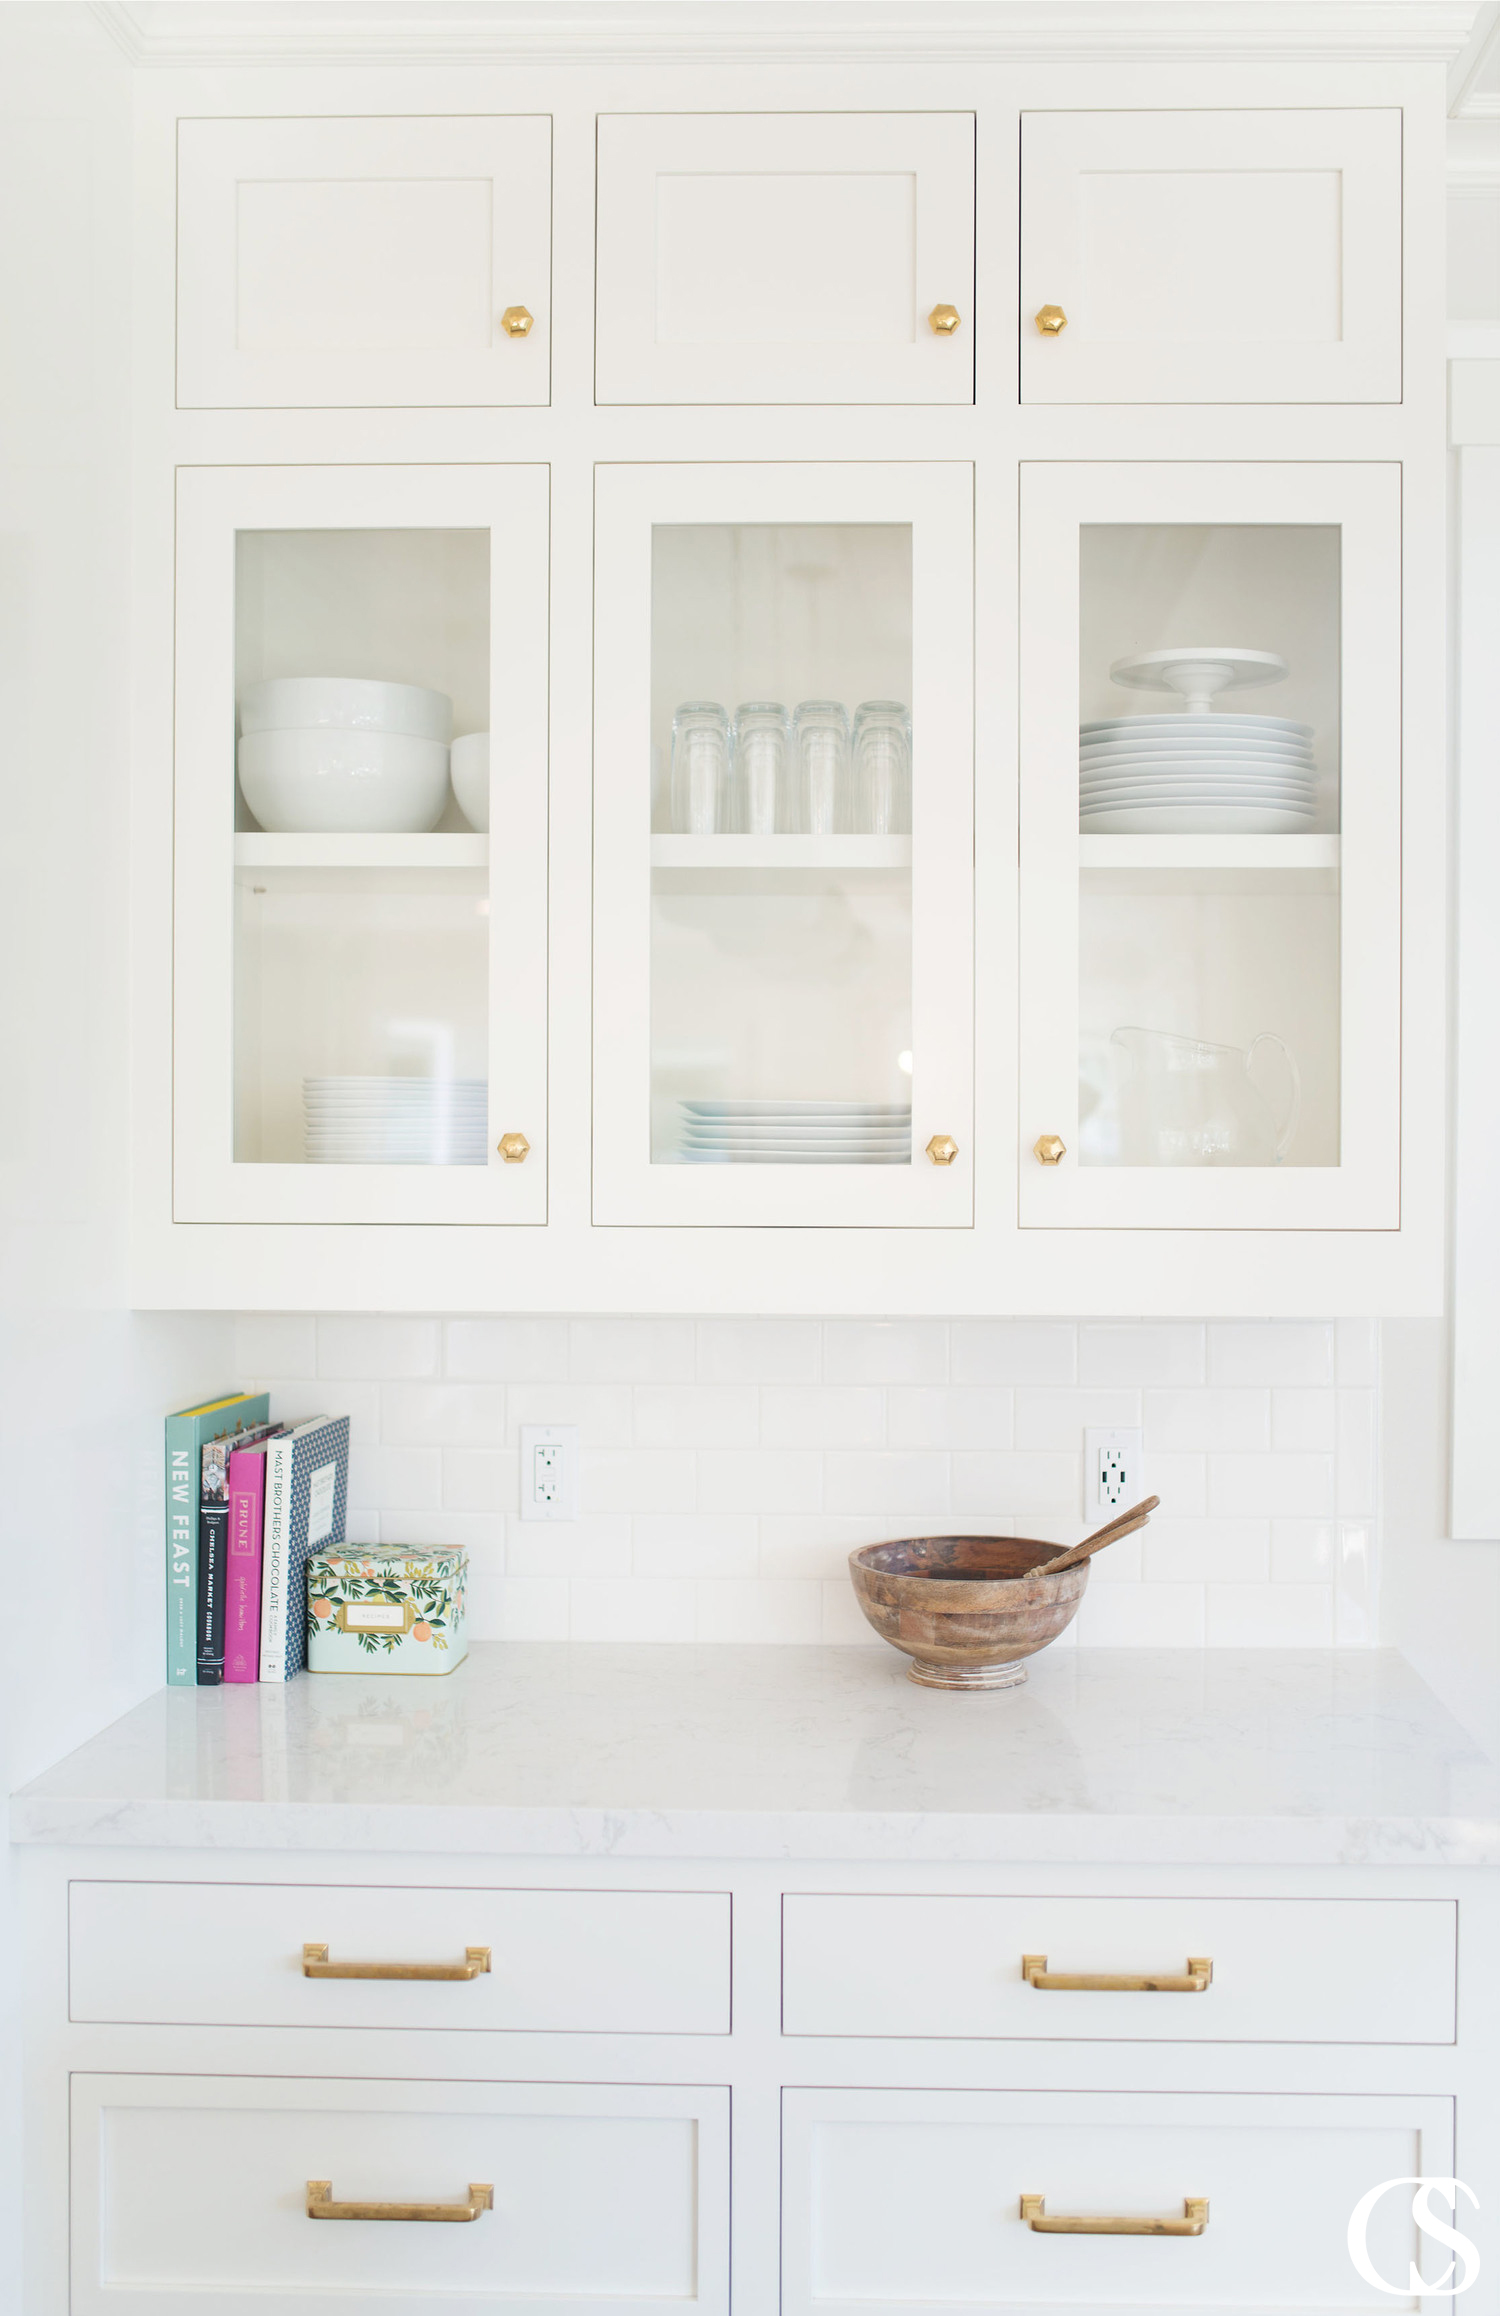 Shaker style cabinets are a popular choice for some of the best custom kitchen cabinets today. The doors feature a simple and flat rectangular profile, usually paired with a flat center panel, achieving a simple, but timeless look.